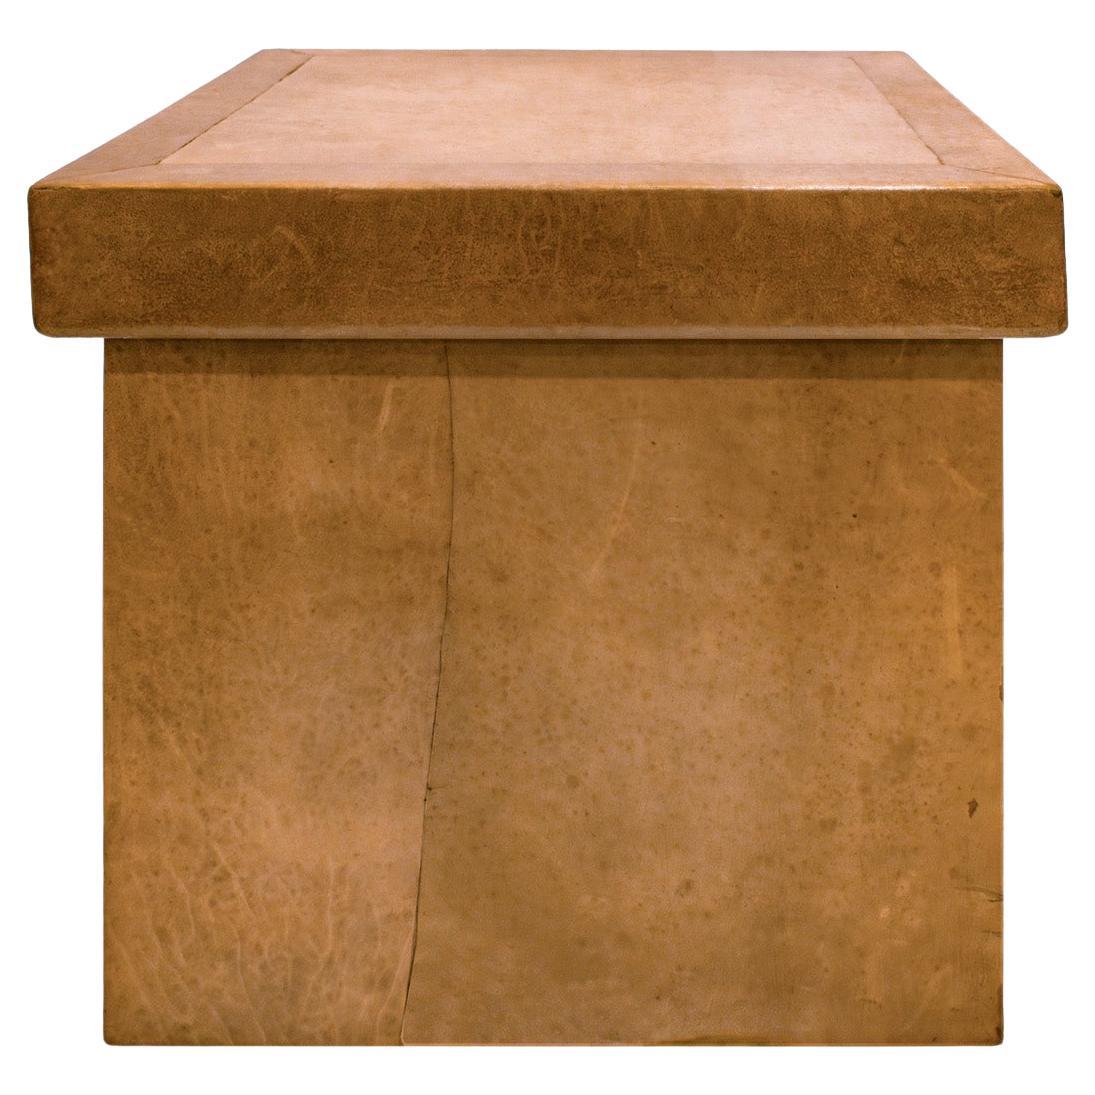 Karl Springer Exceptional Box Table In Leather 1976-1978 For Sale